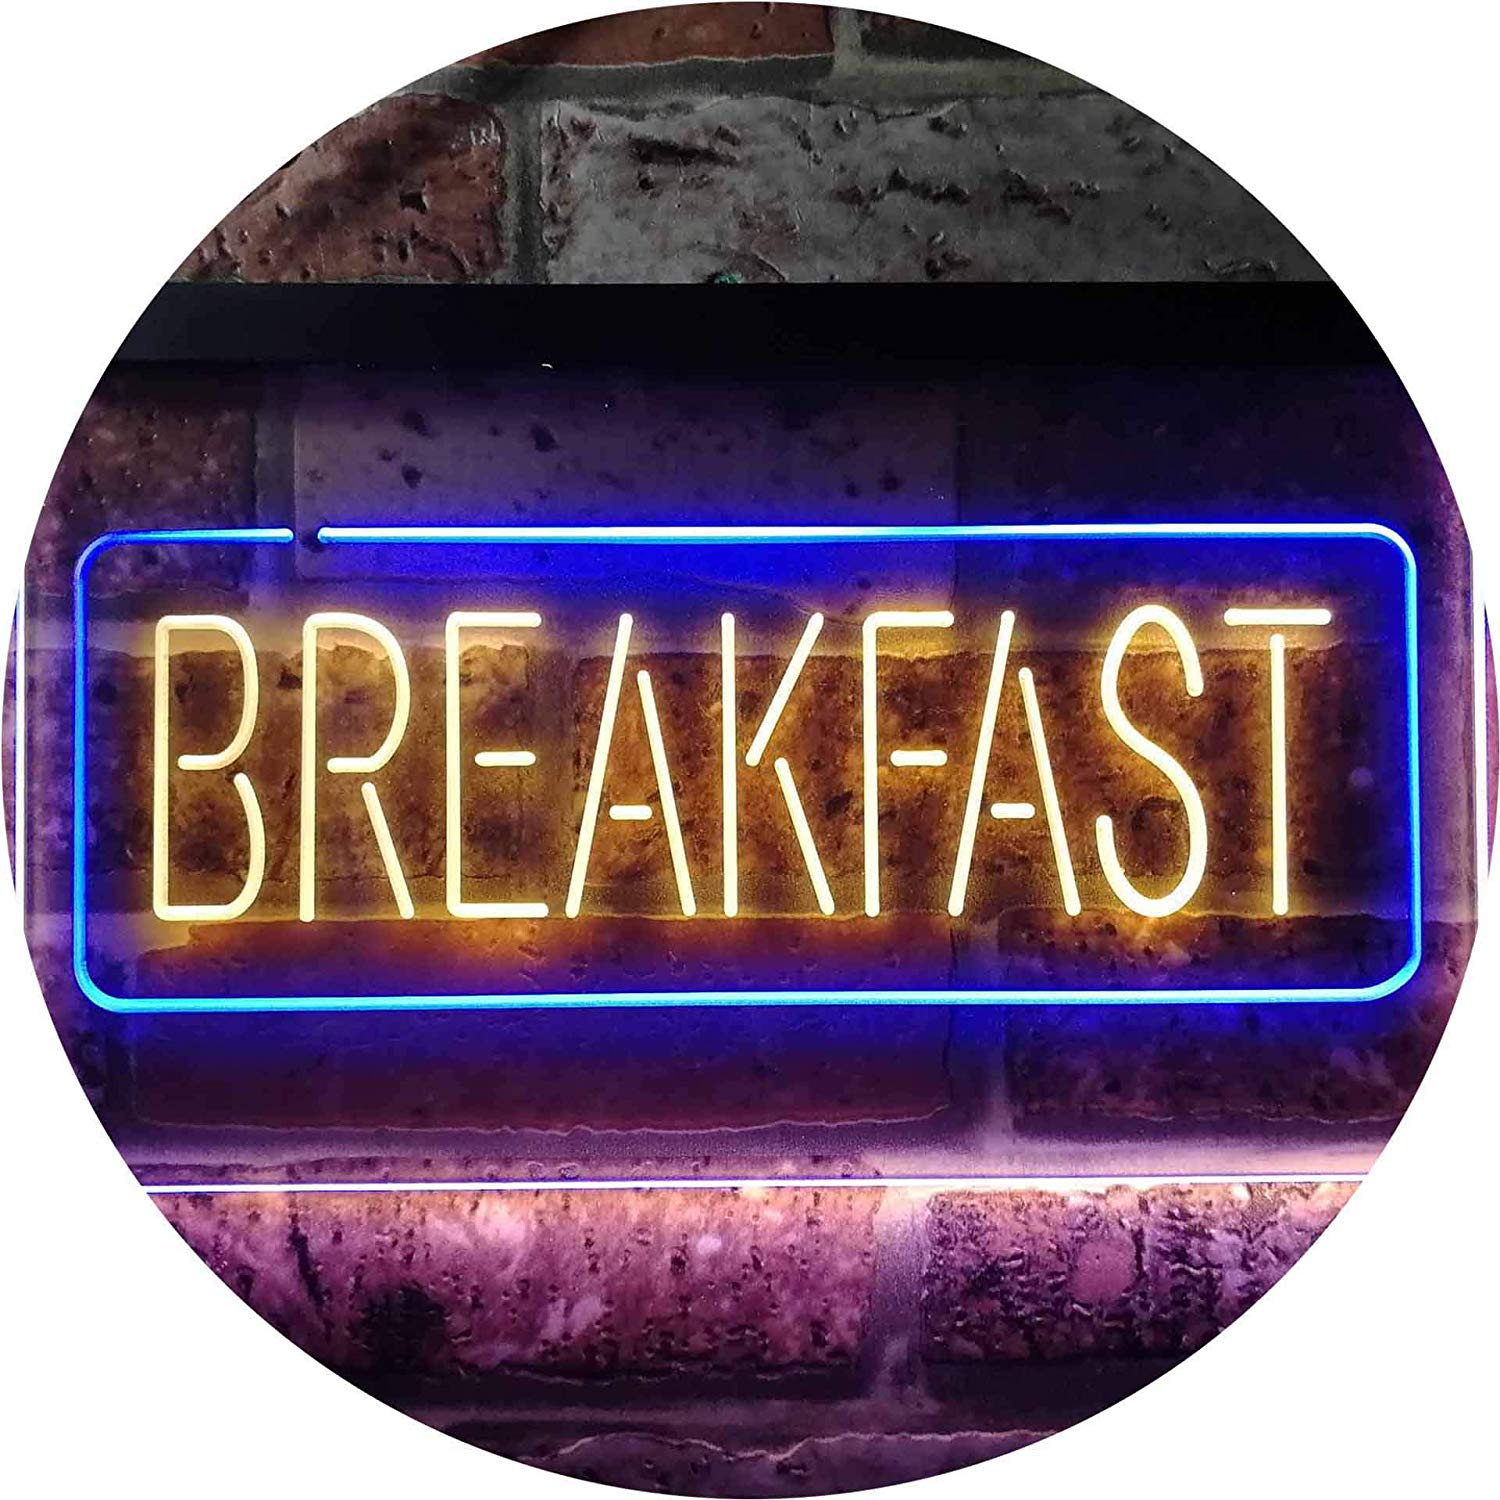 Diner Breakfast LED Neon Light Sign - Way Up Gifts